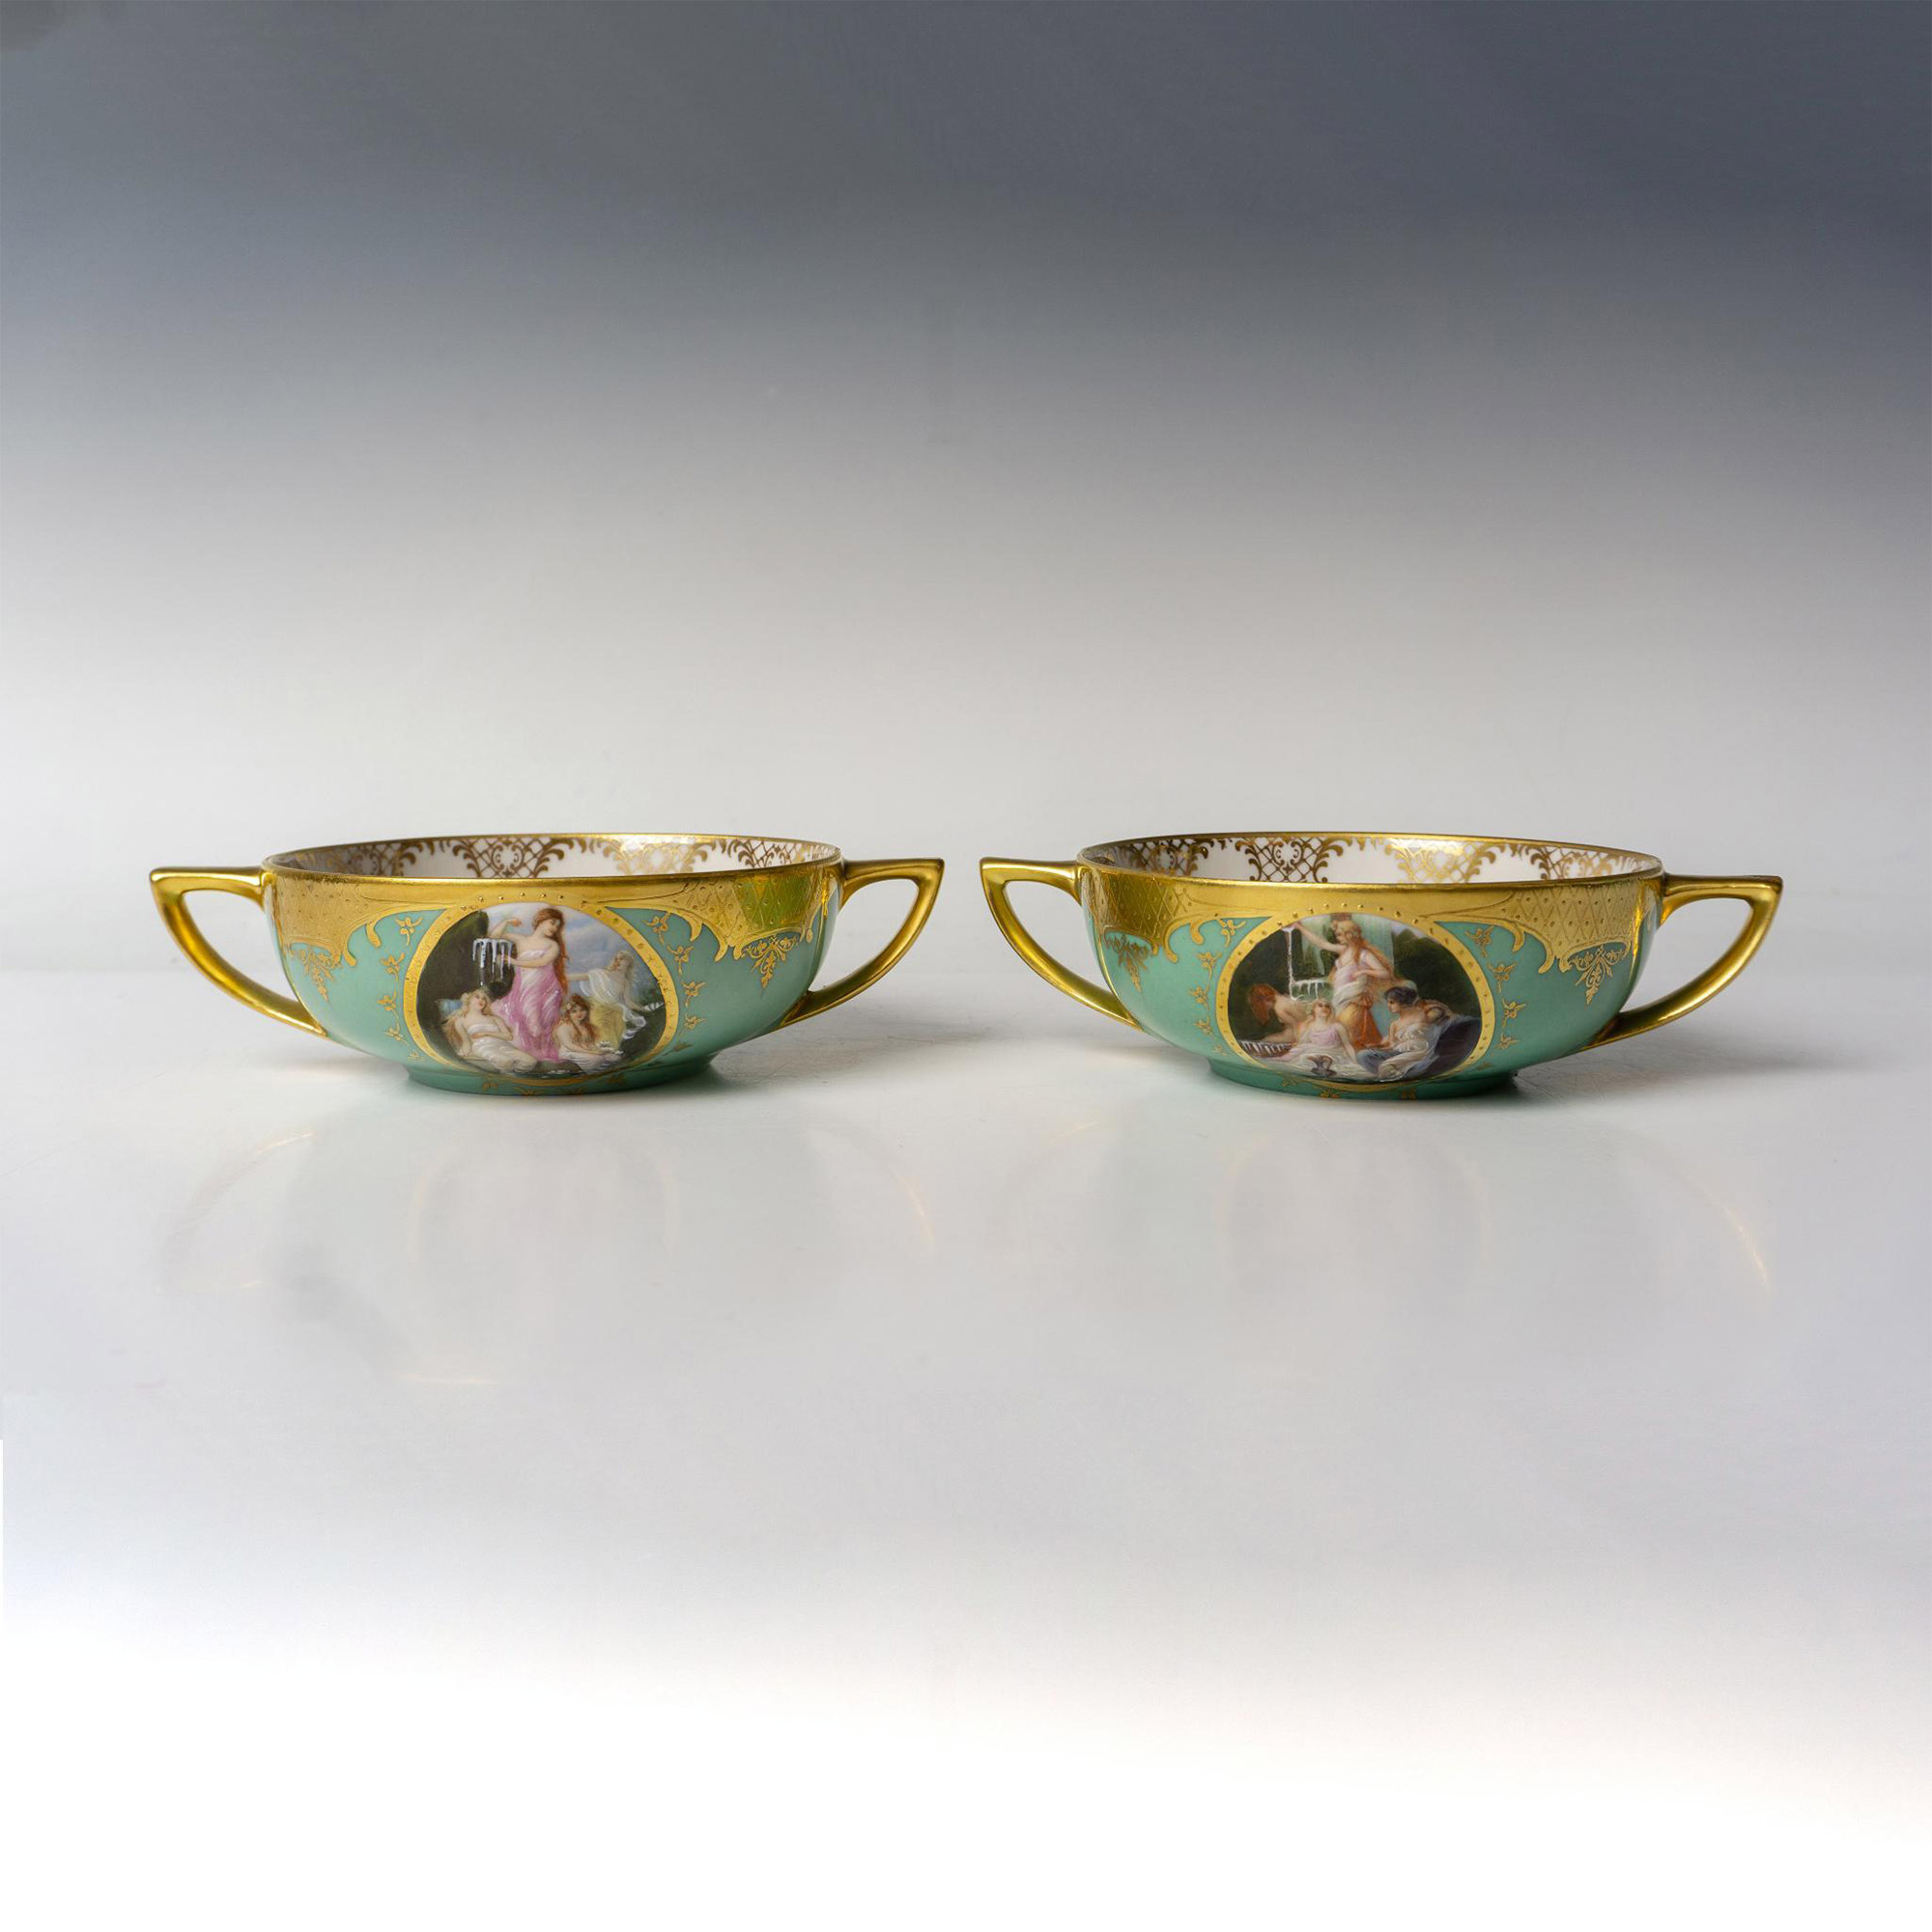 Pair of Karlsbad Czechoslovakia Porcelain Soup Bowls - Image 3 of 3